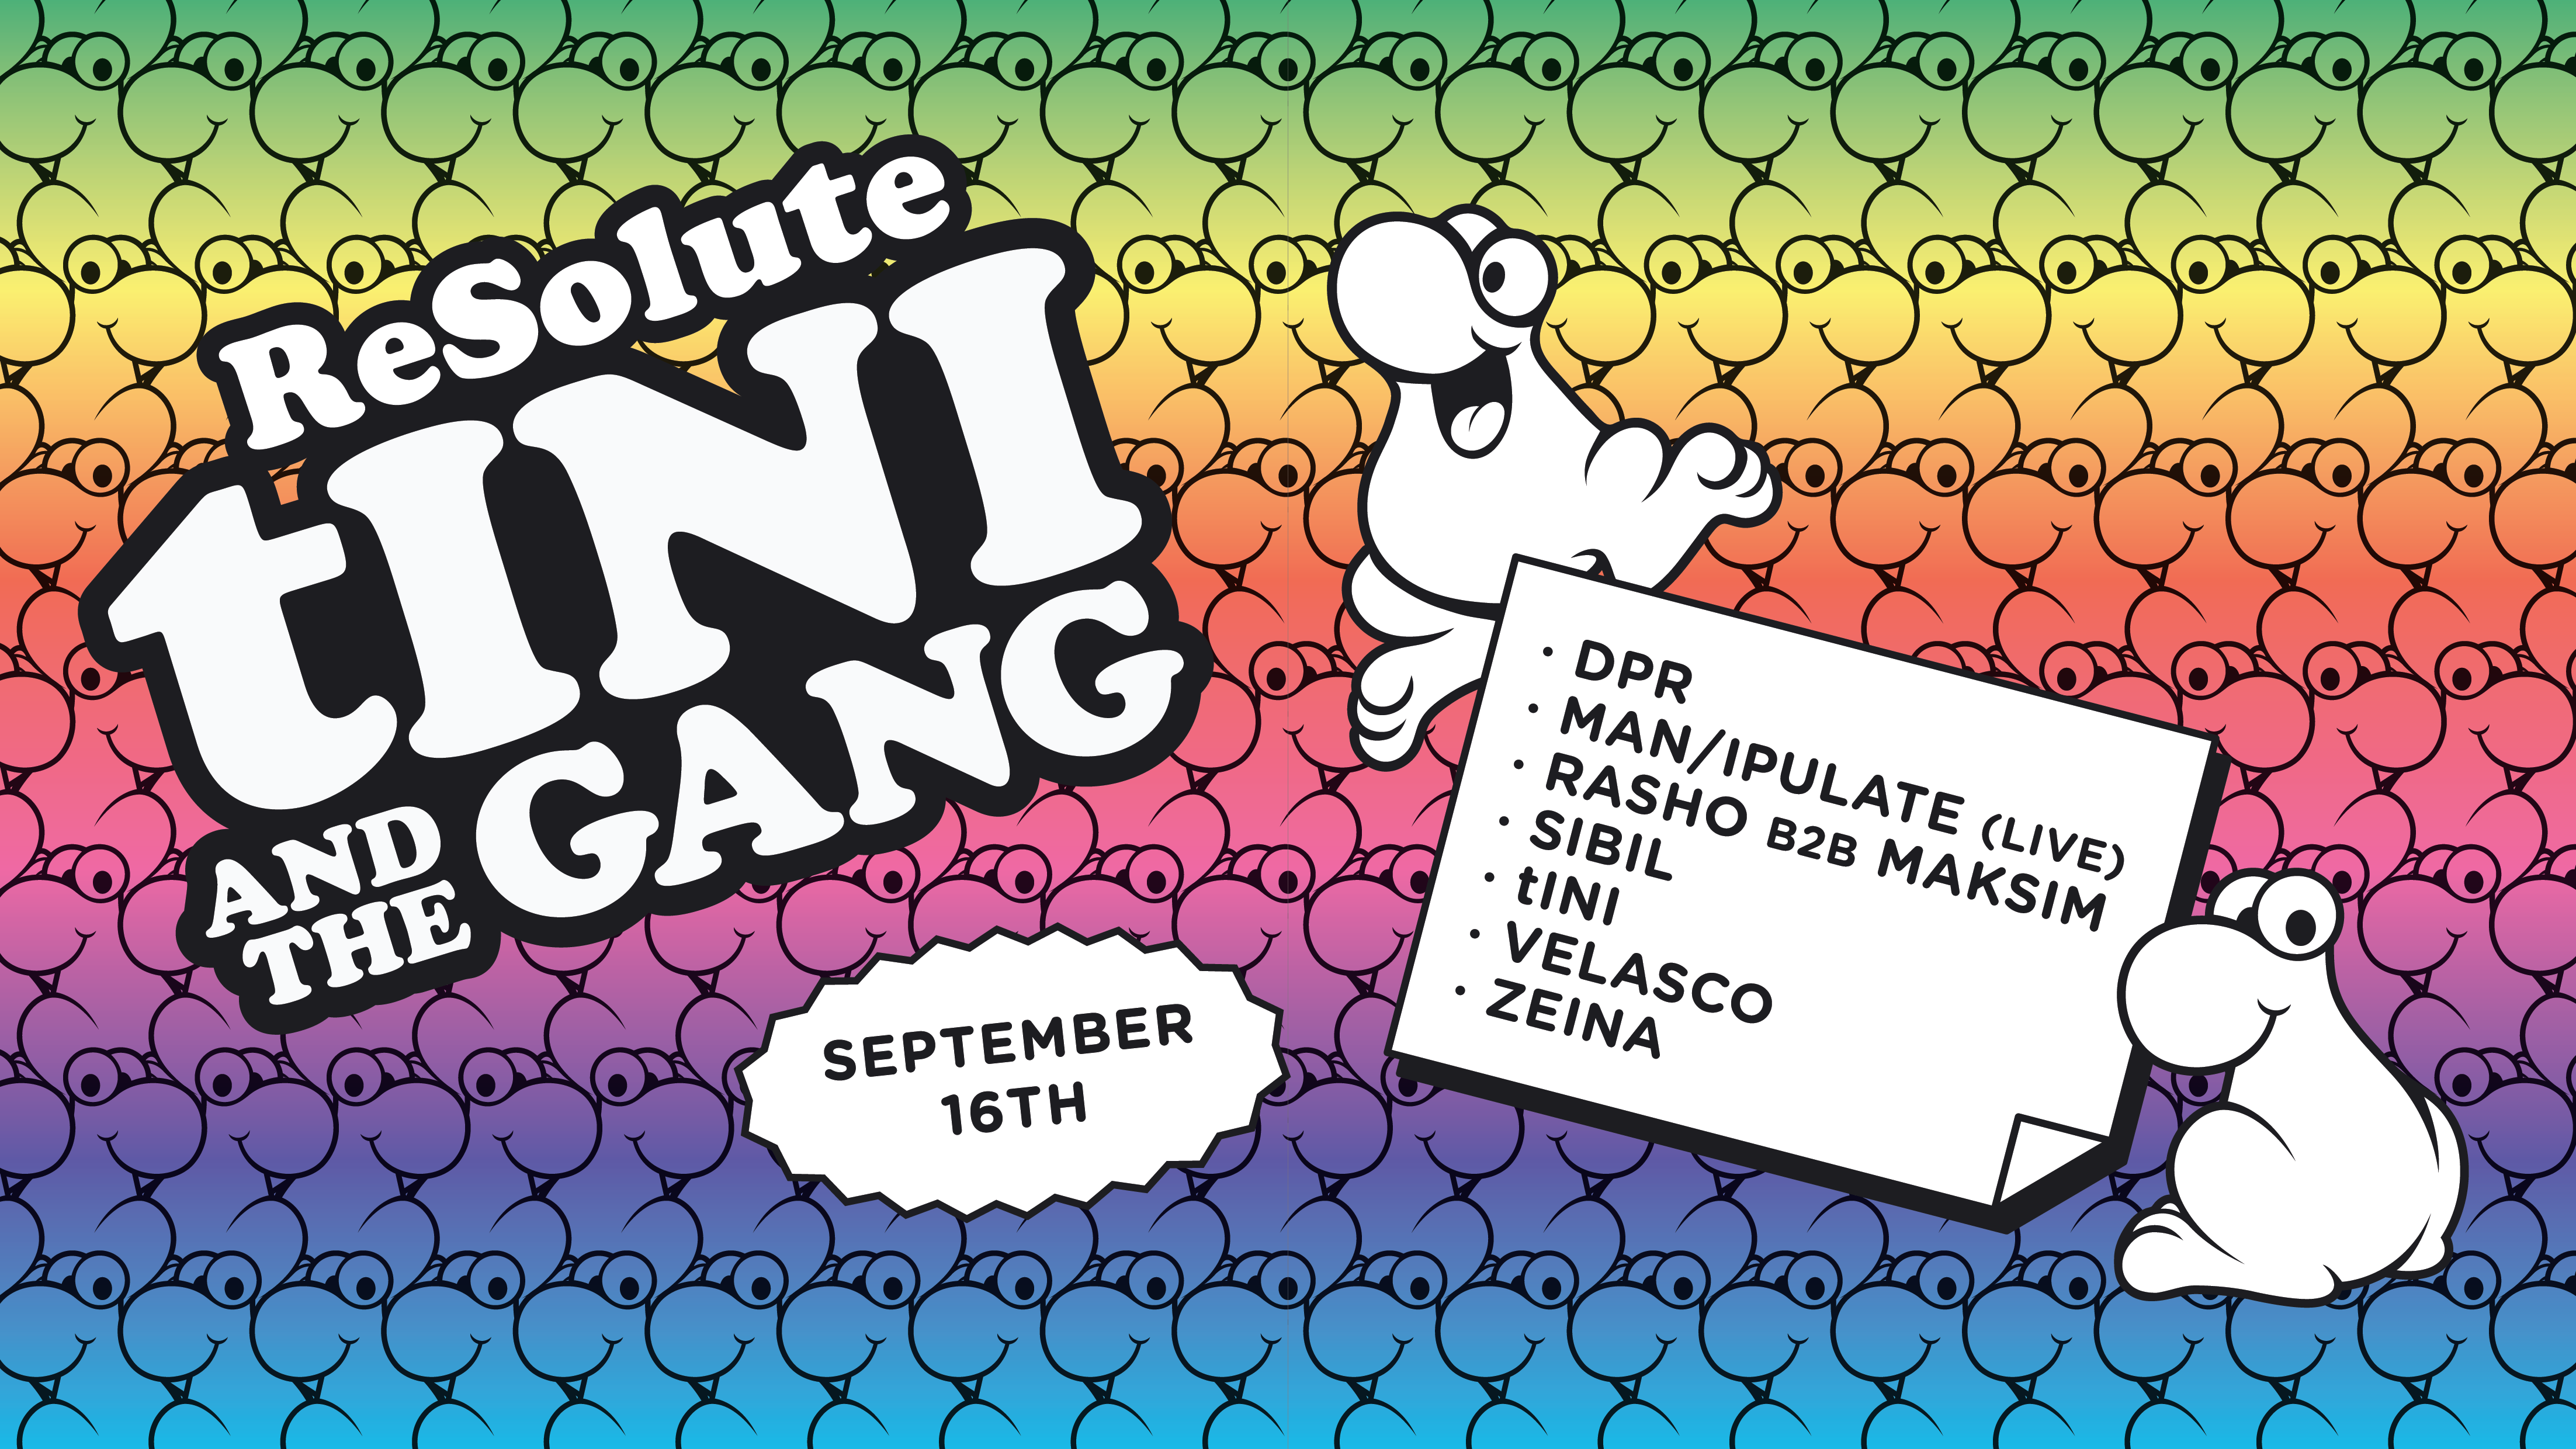 ReSolute presents: tINI and The Gang - フライヤー表